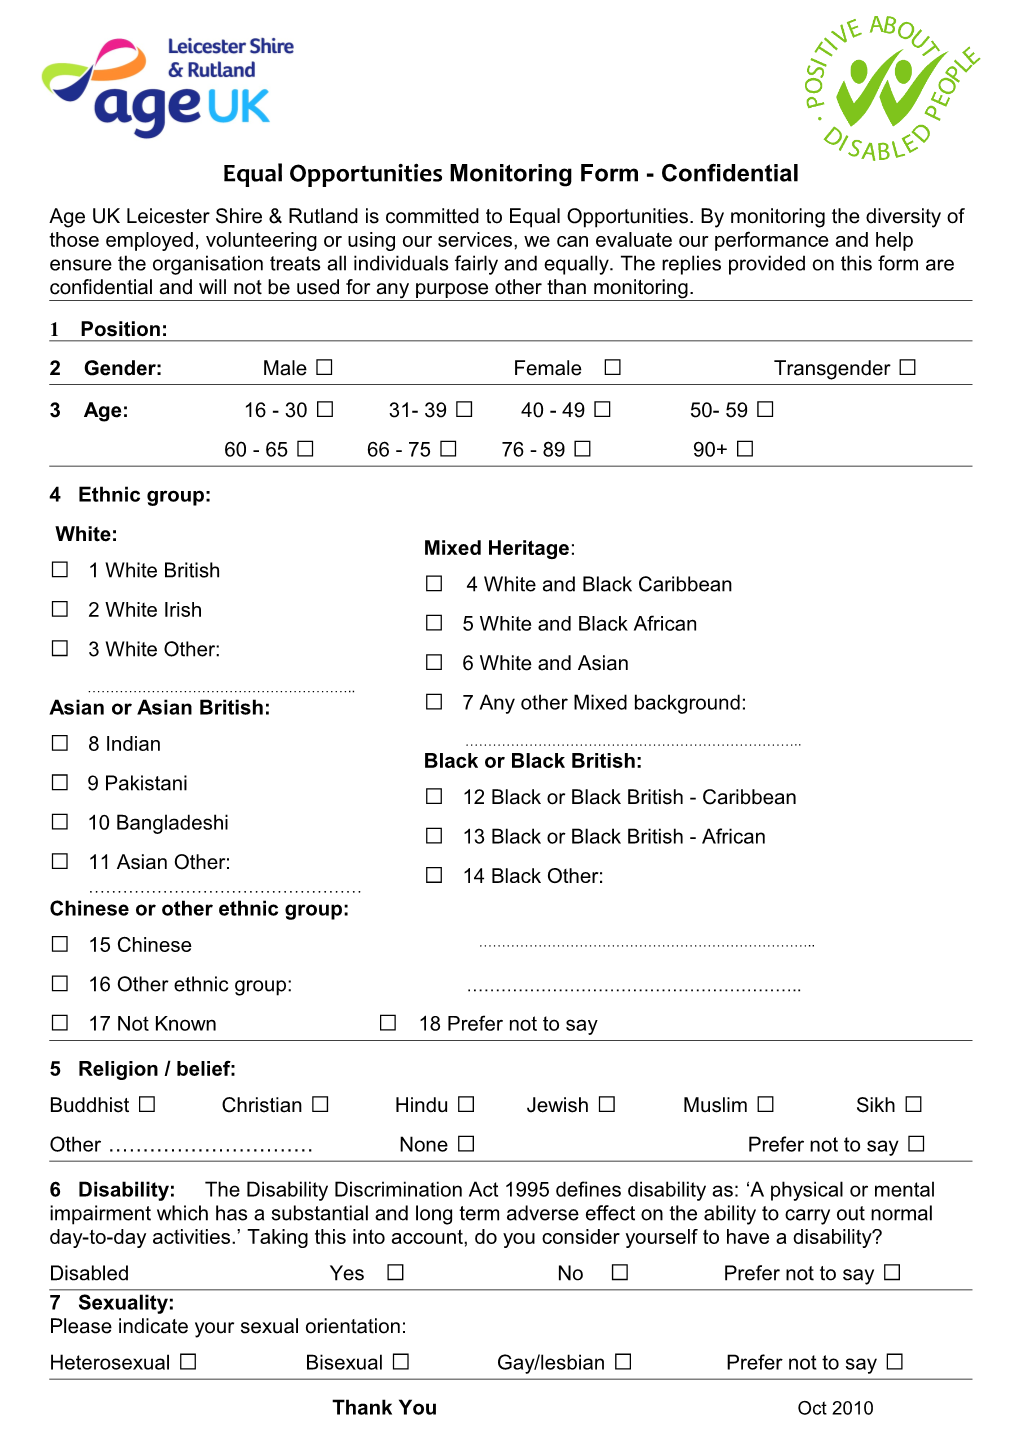 ACL Diversity Monitoring Form